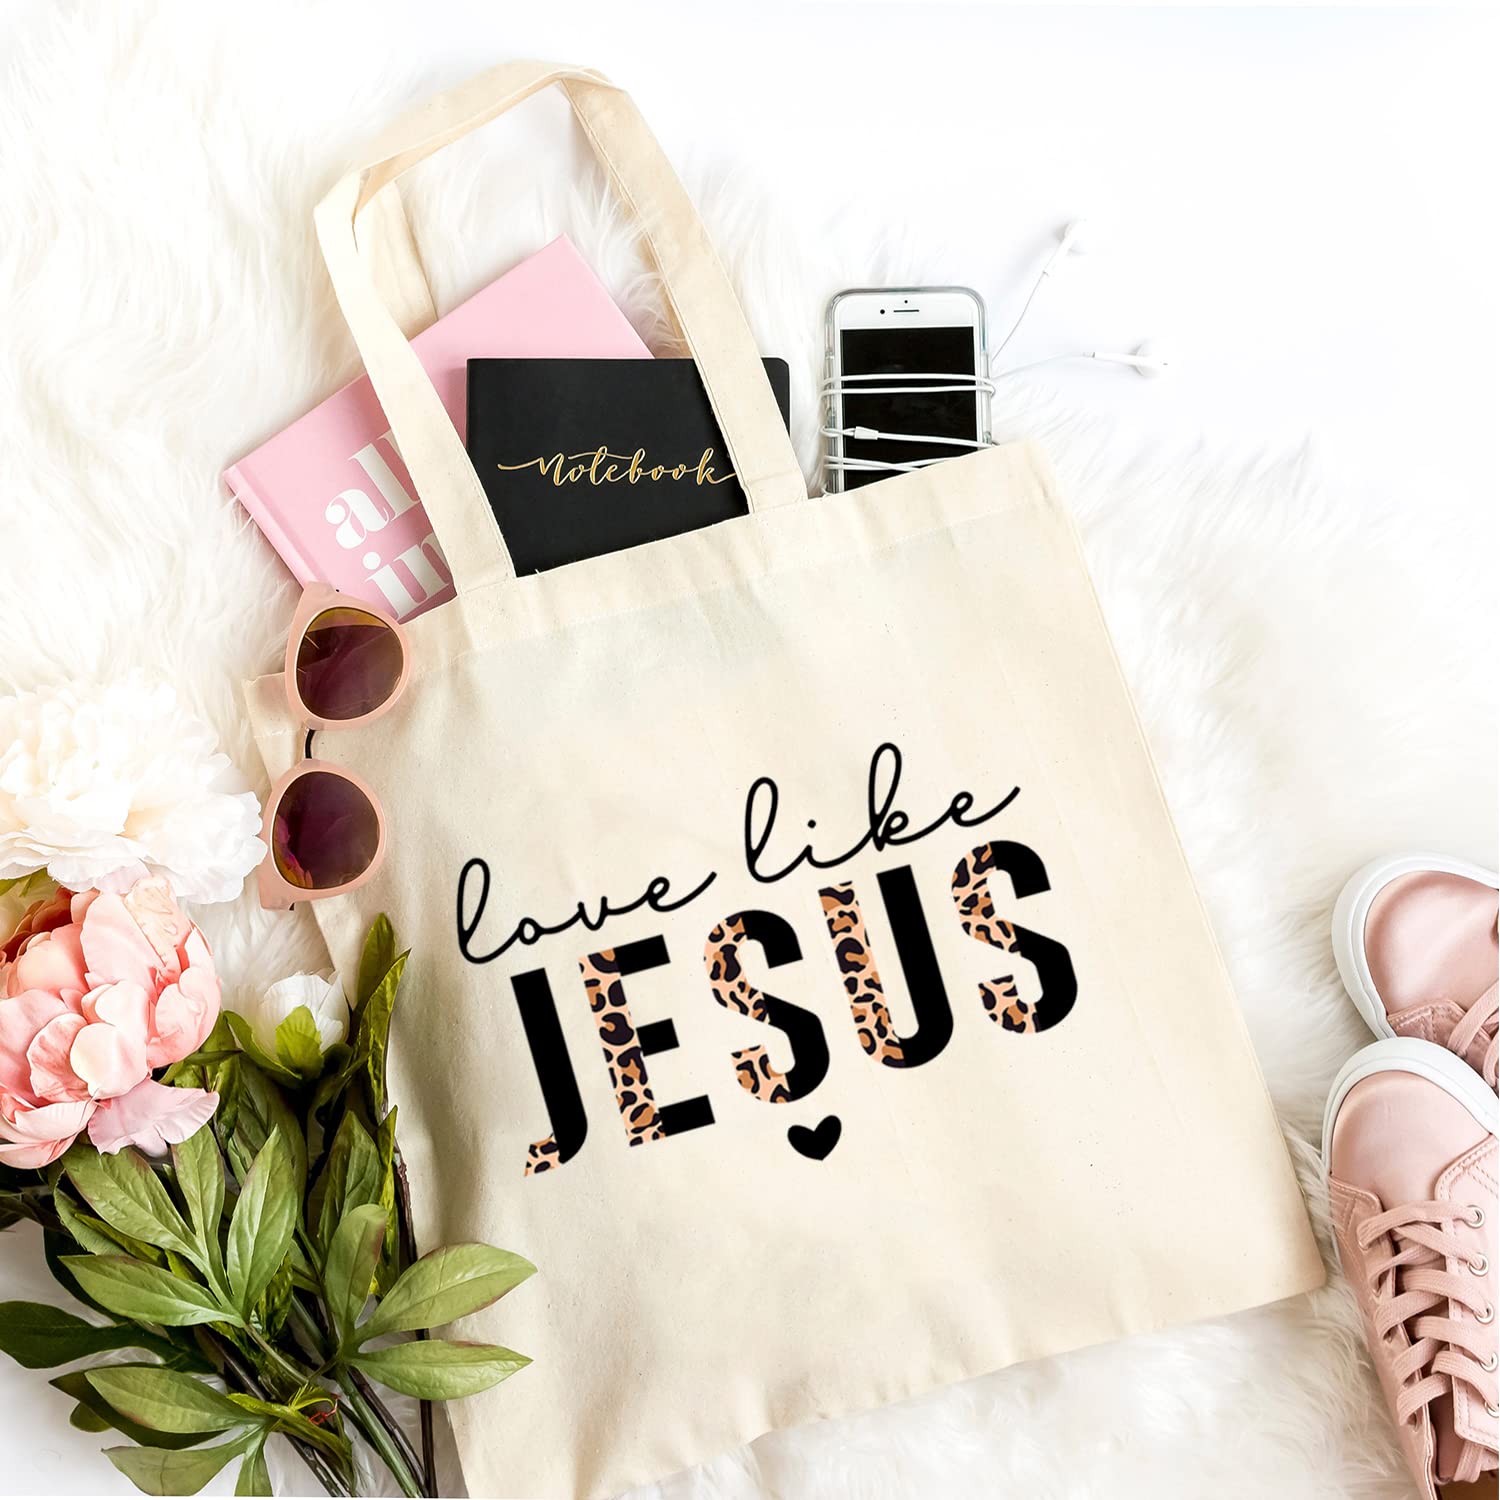 Women's Love Like Jesus Half Leopard Black Canvas Tote Bag Funny Bible Quotes Christian Reusable Shopping Bag